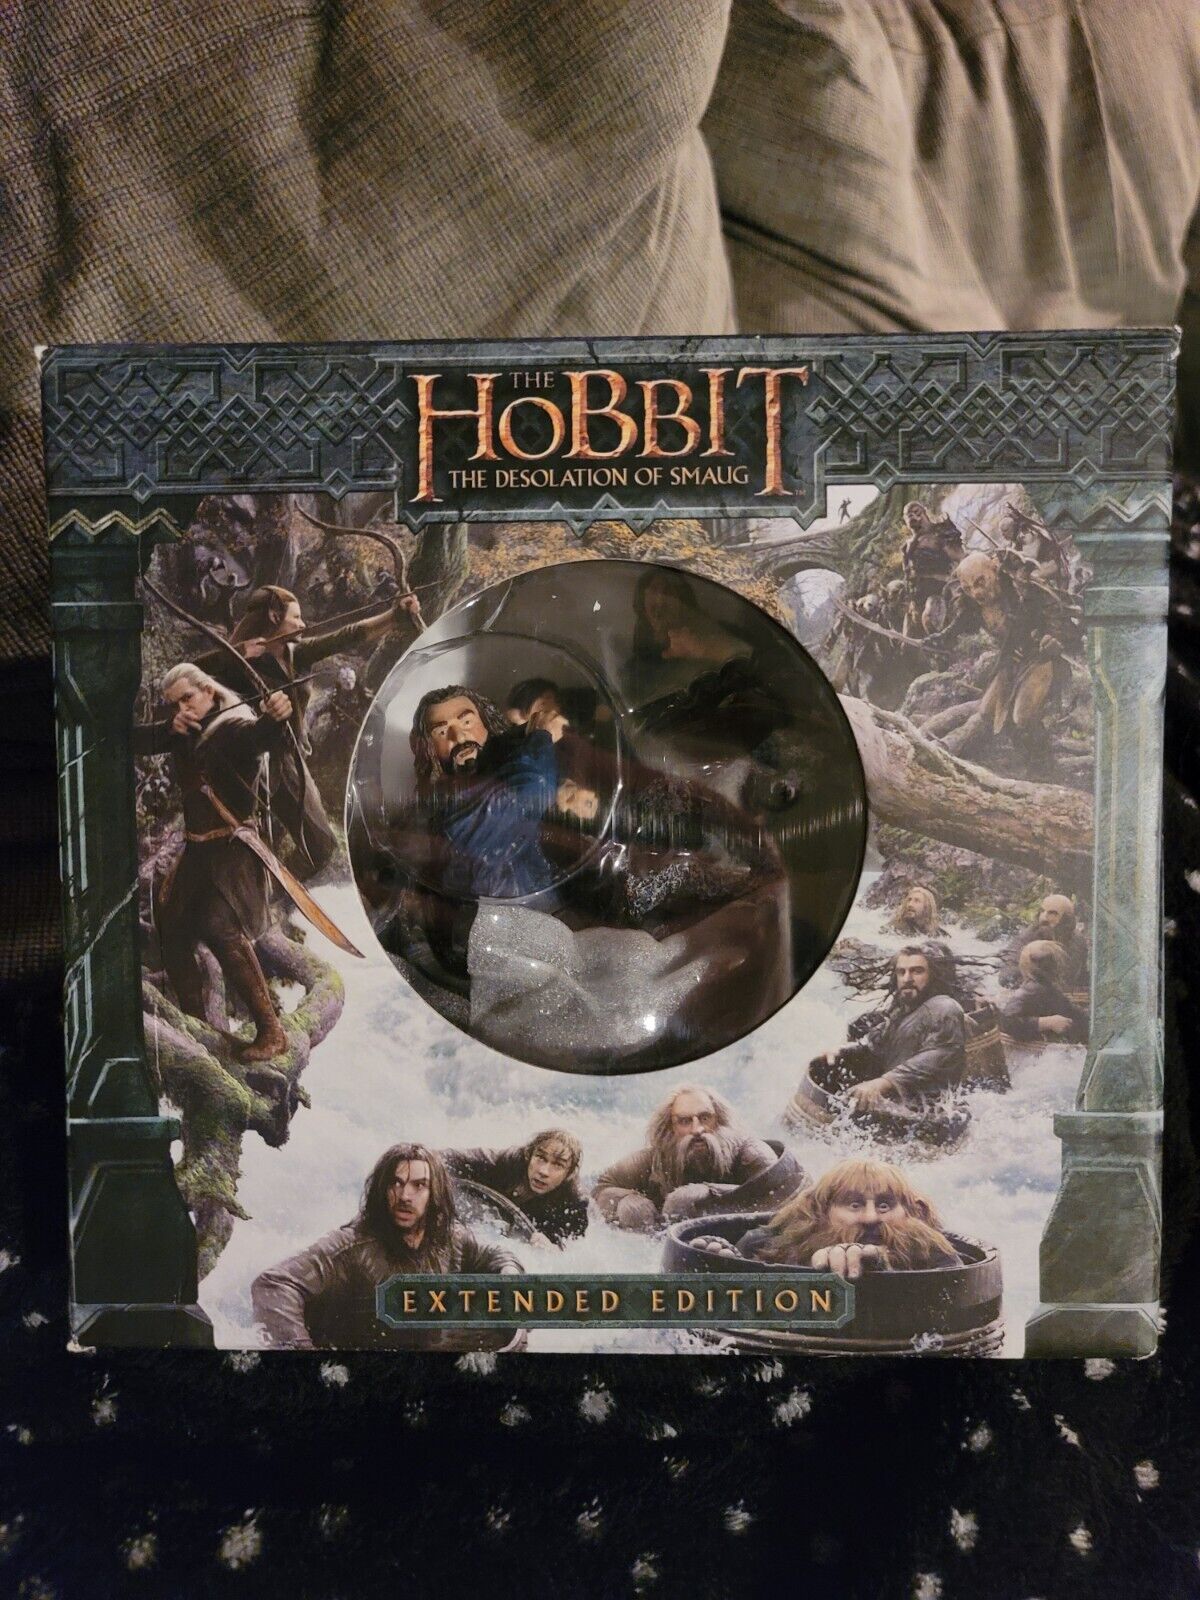 The Hobbit Desolation Of Smaug Extended Edition Collectors Box Set